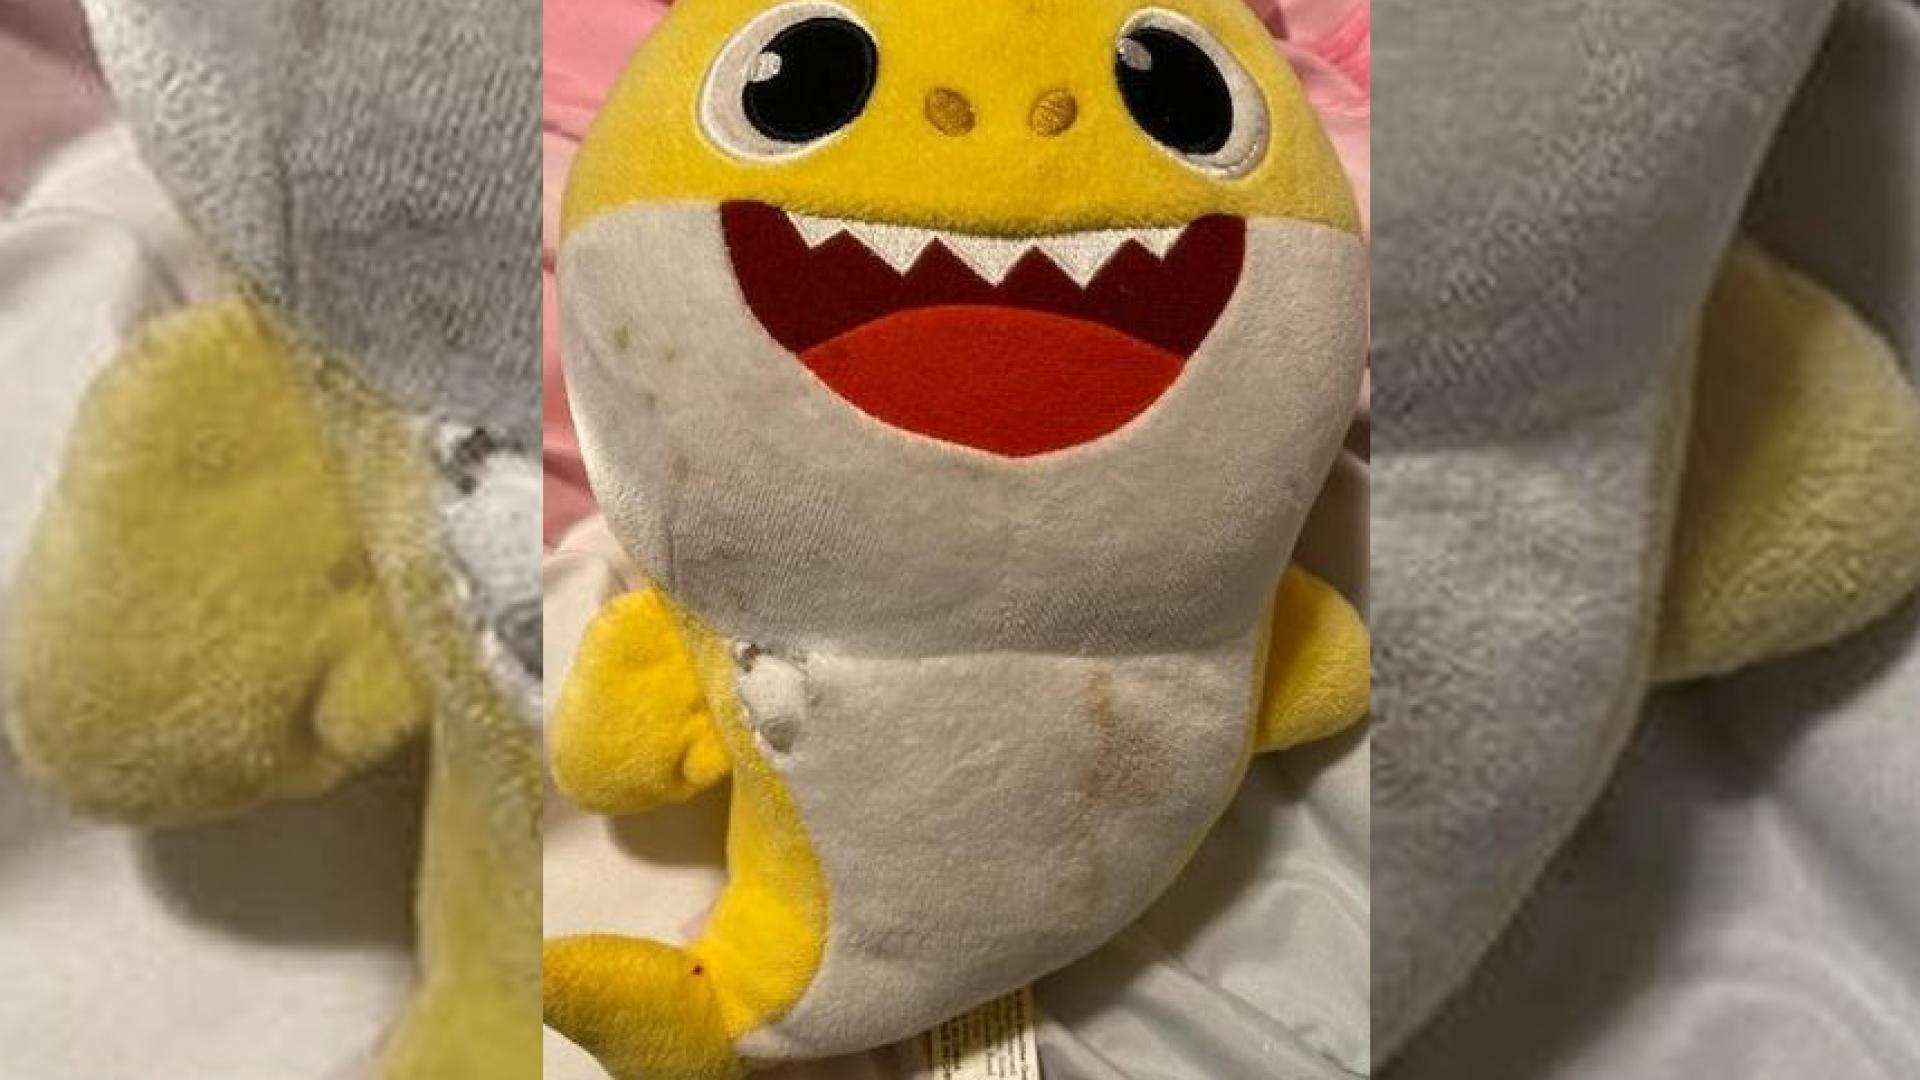 A bullet fired into a Madison, Wisconsin home last week missed a sleeping toddler by inches, coming to rest in a stuffed "Baby Shark" toy by her head.